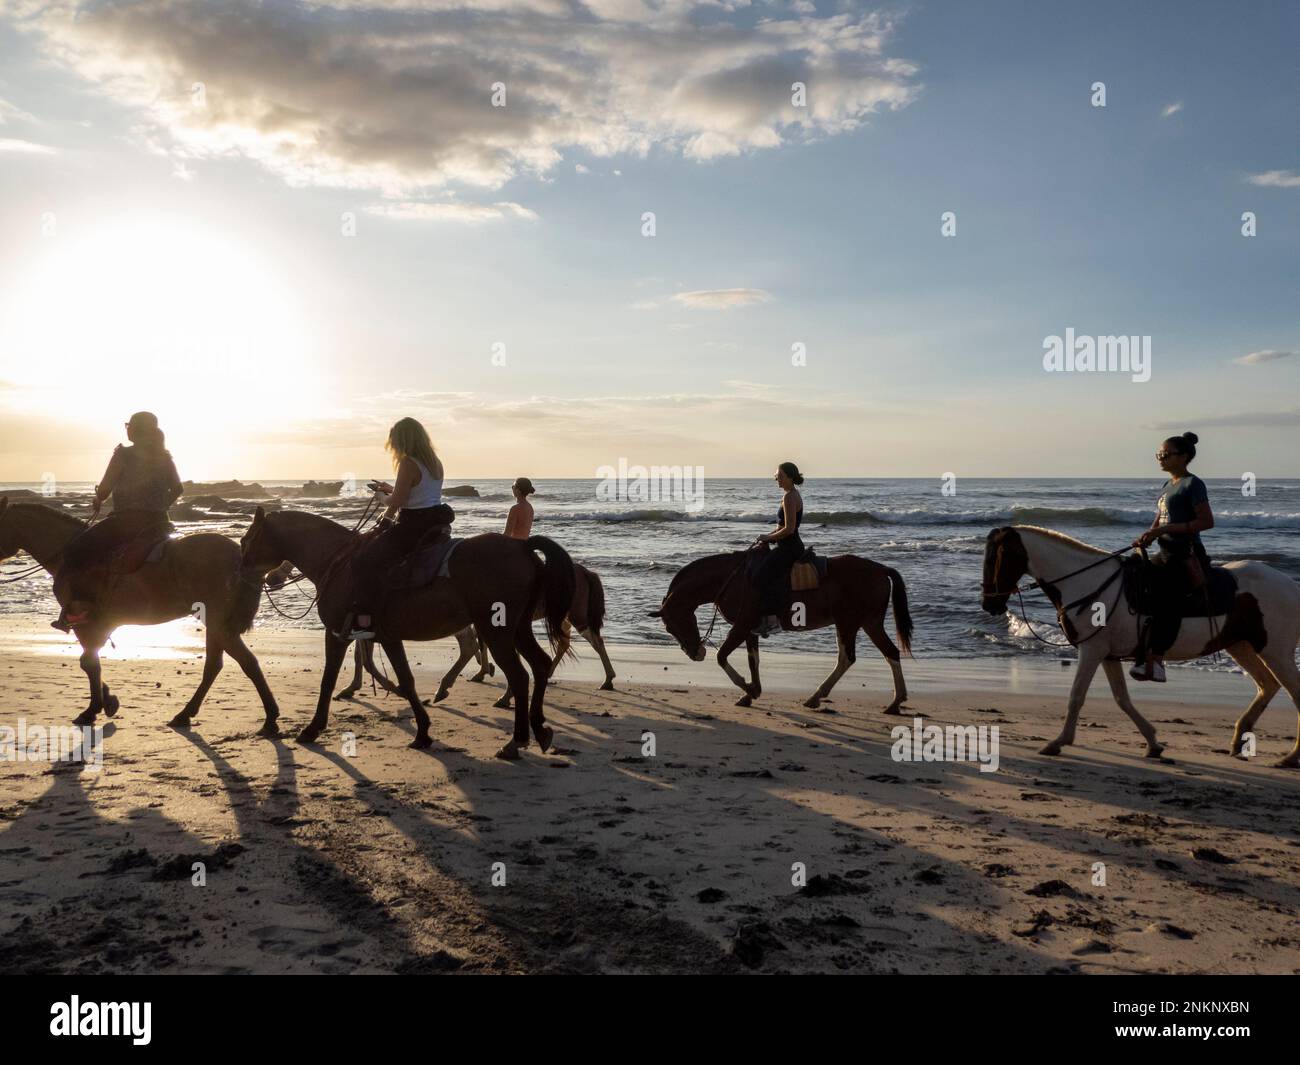 A group of horse riders enjoy time on the beach as the sun starts to set in Nosara in Costa Rica Stock Photo